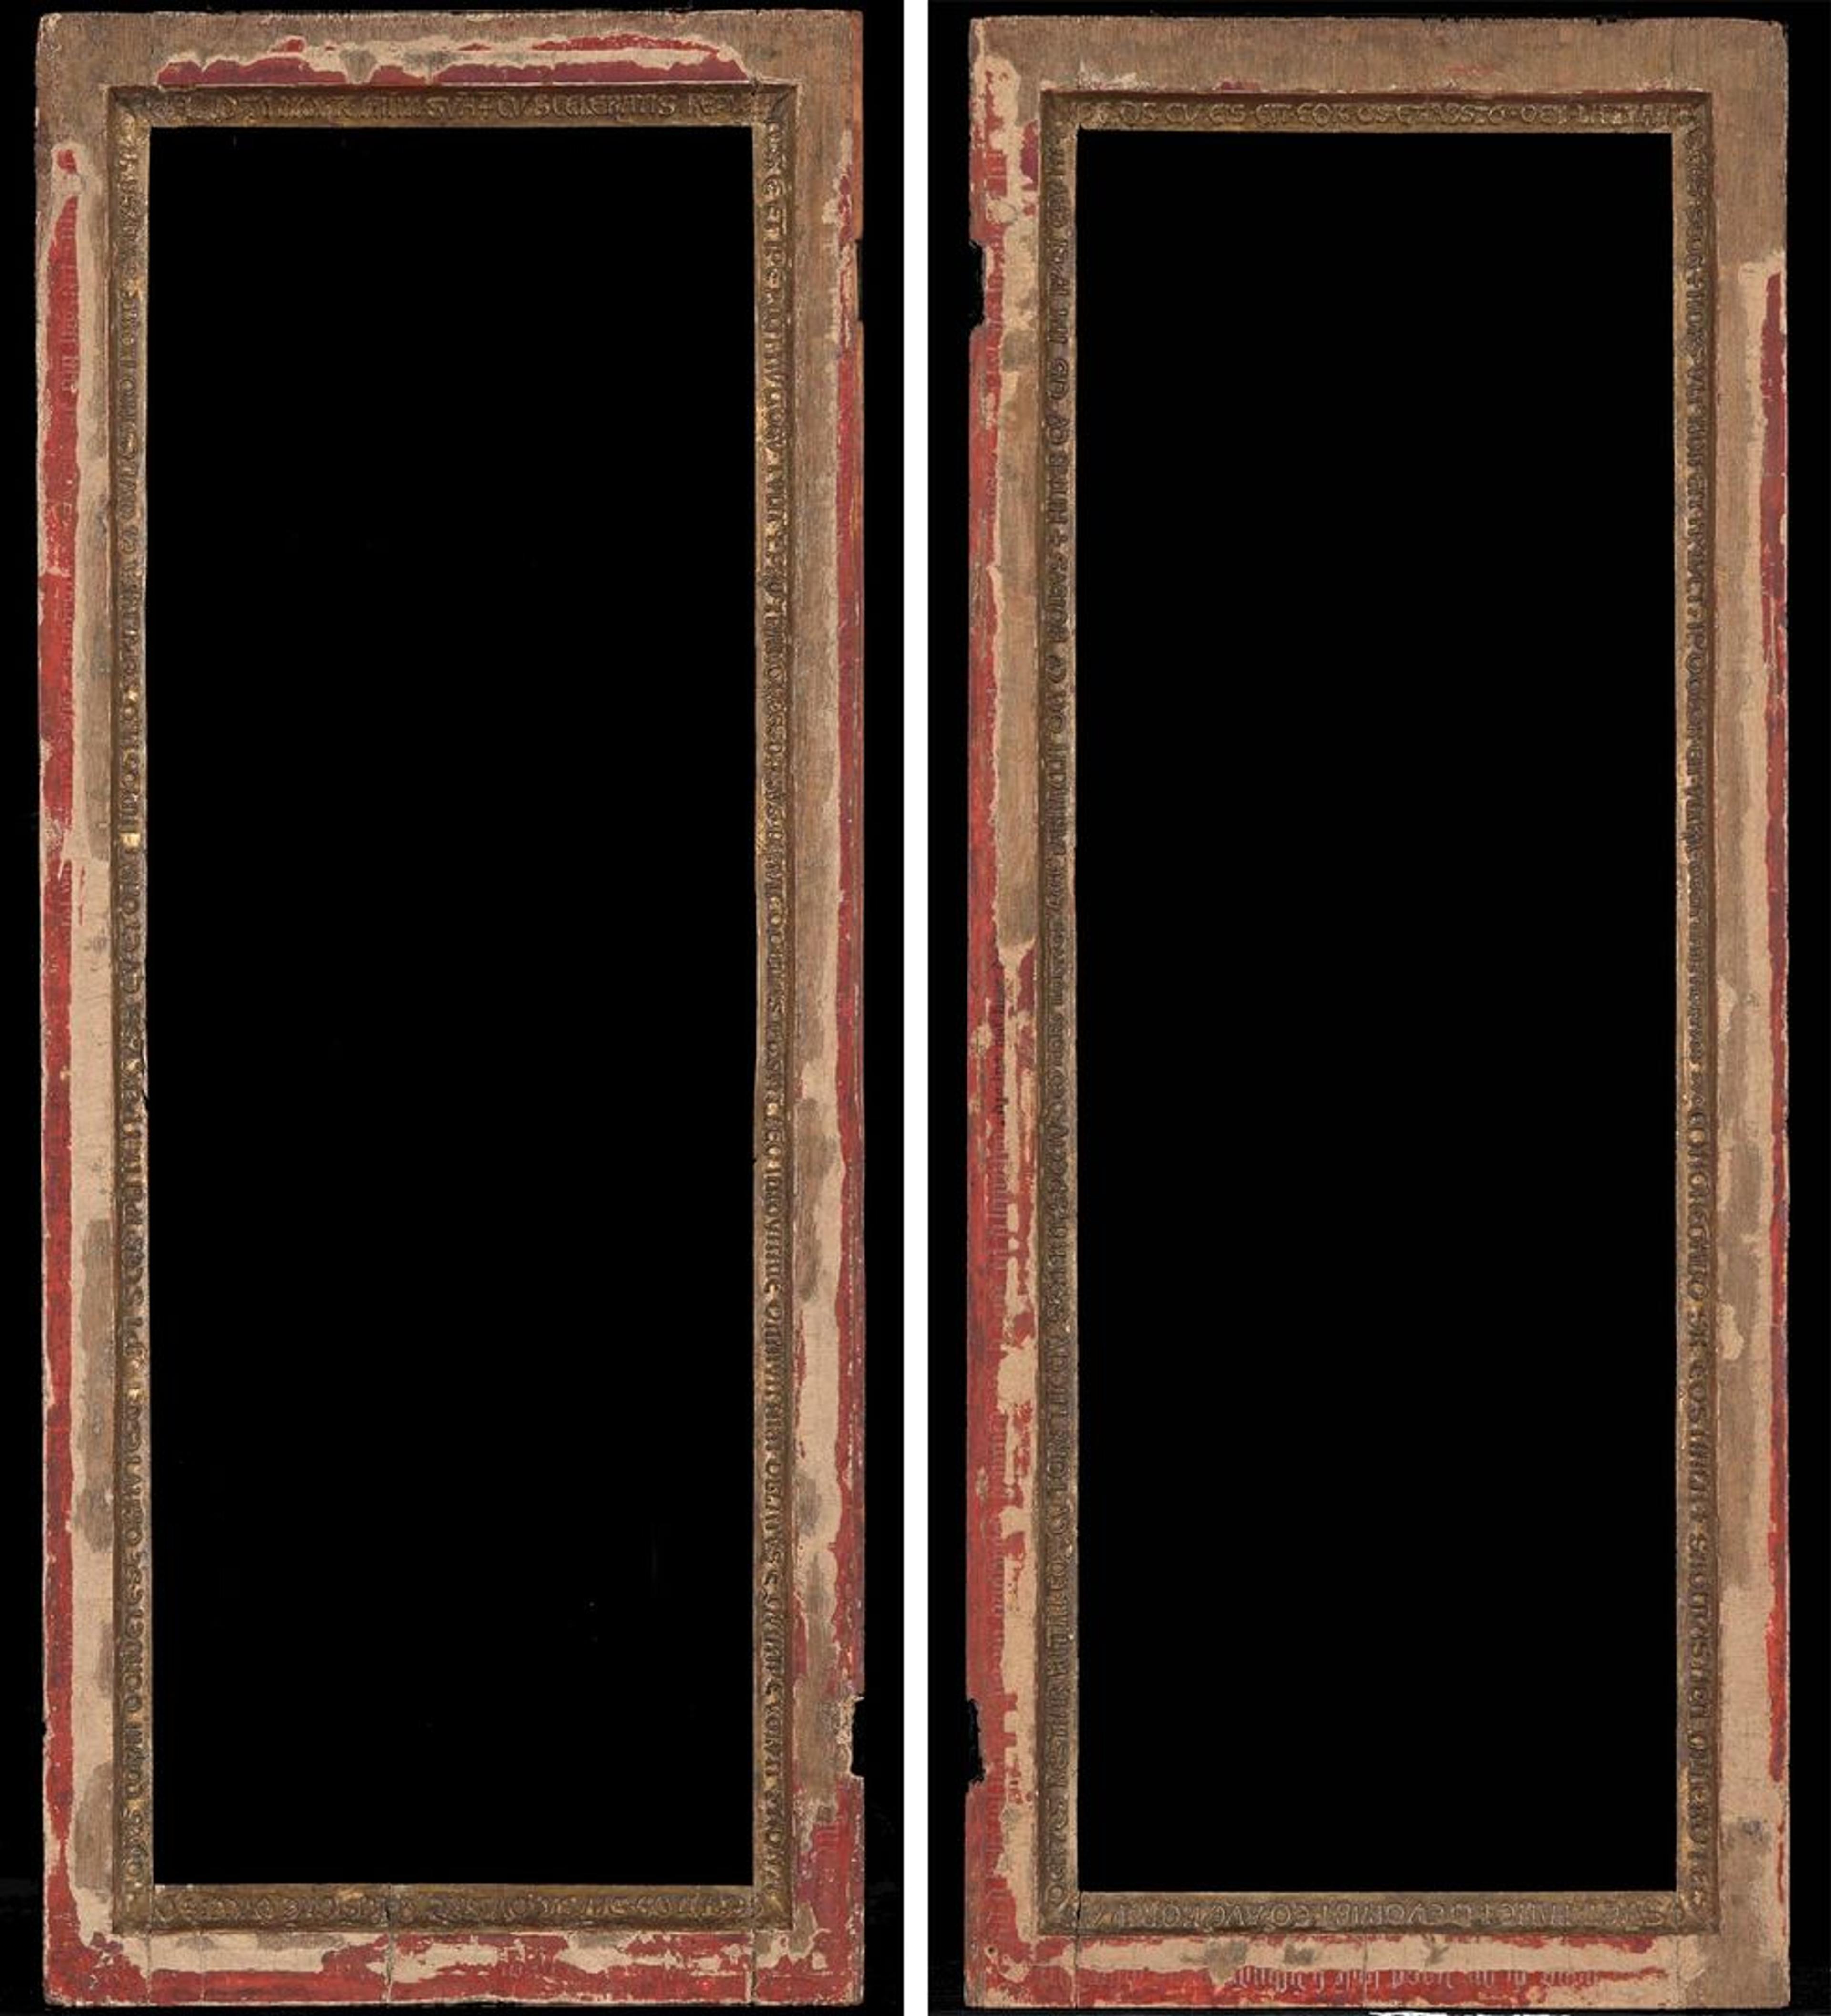 Photos of two rectangular frames against a black background